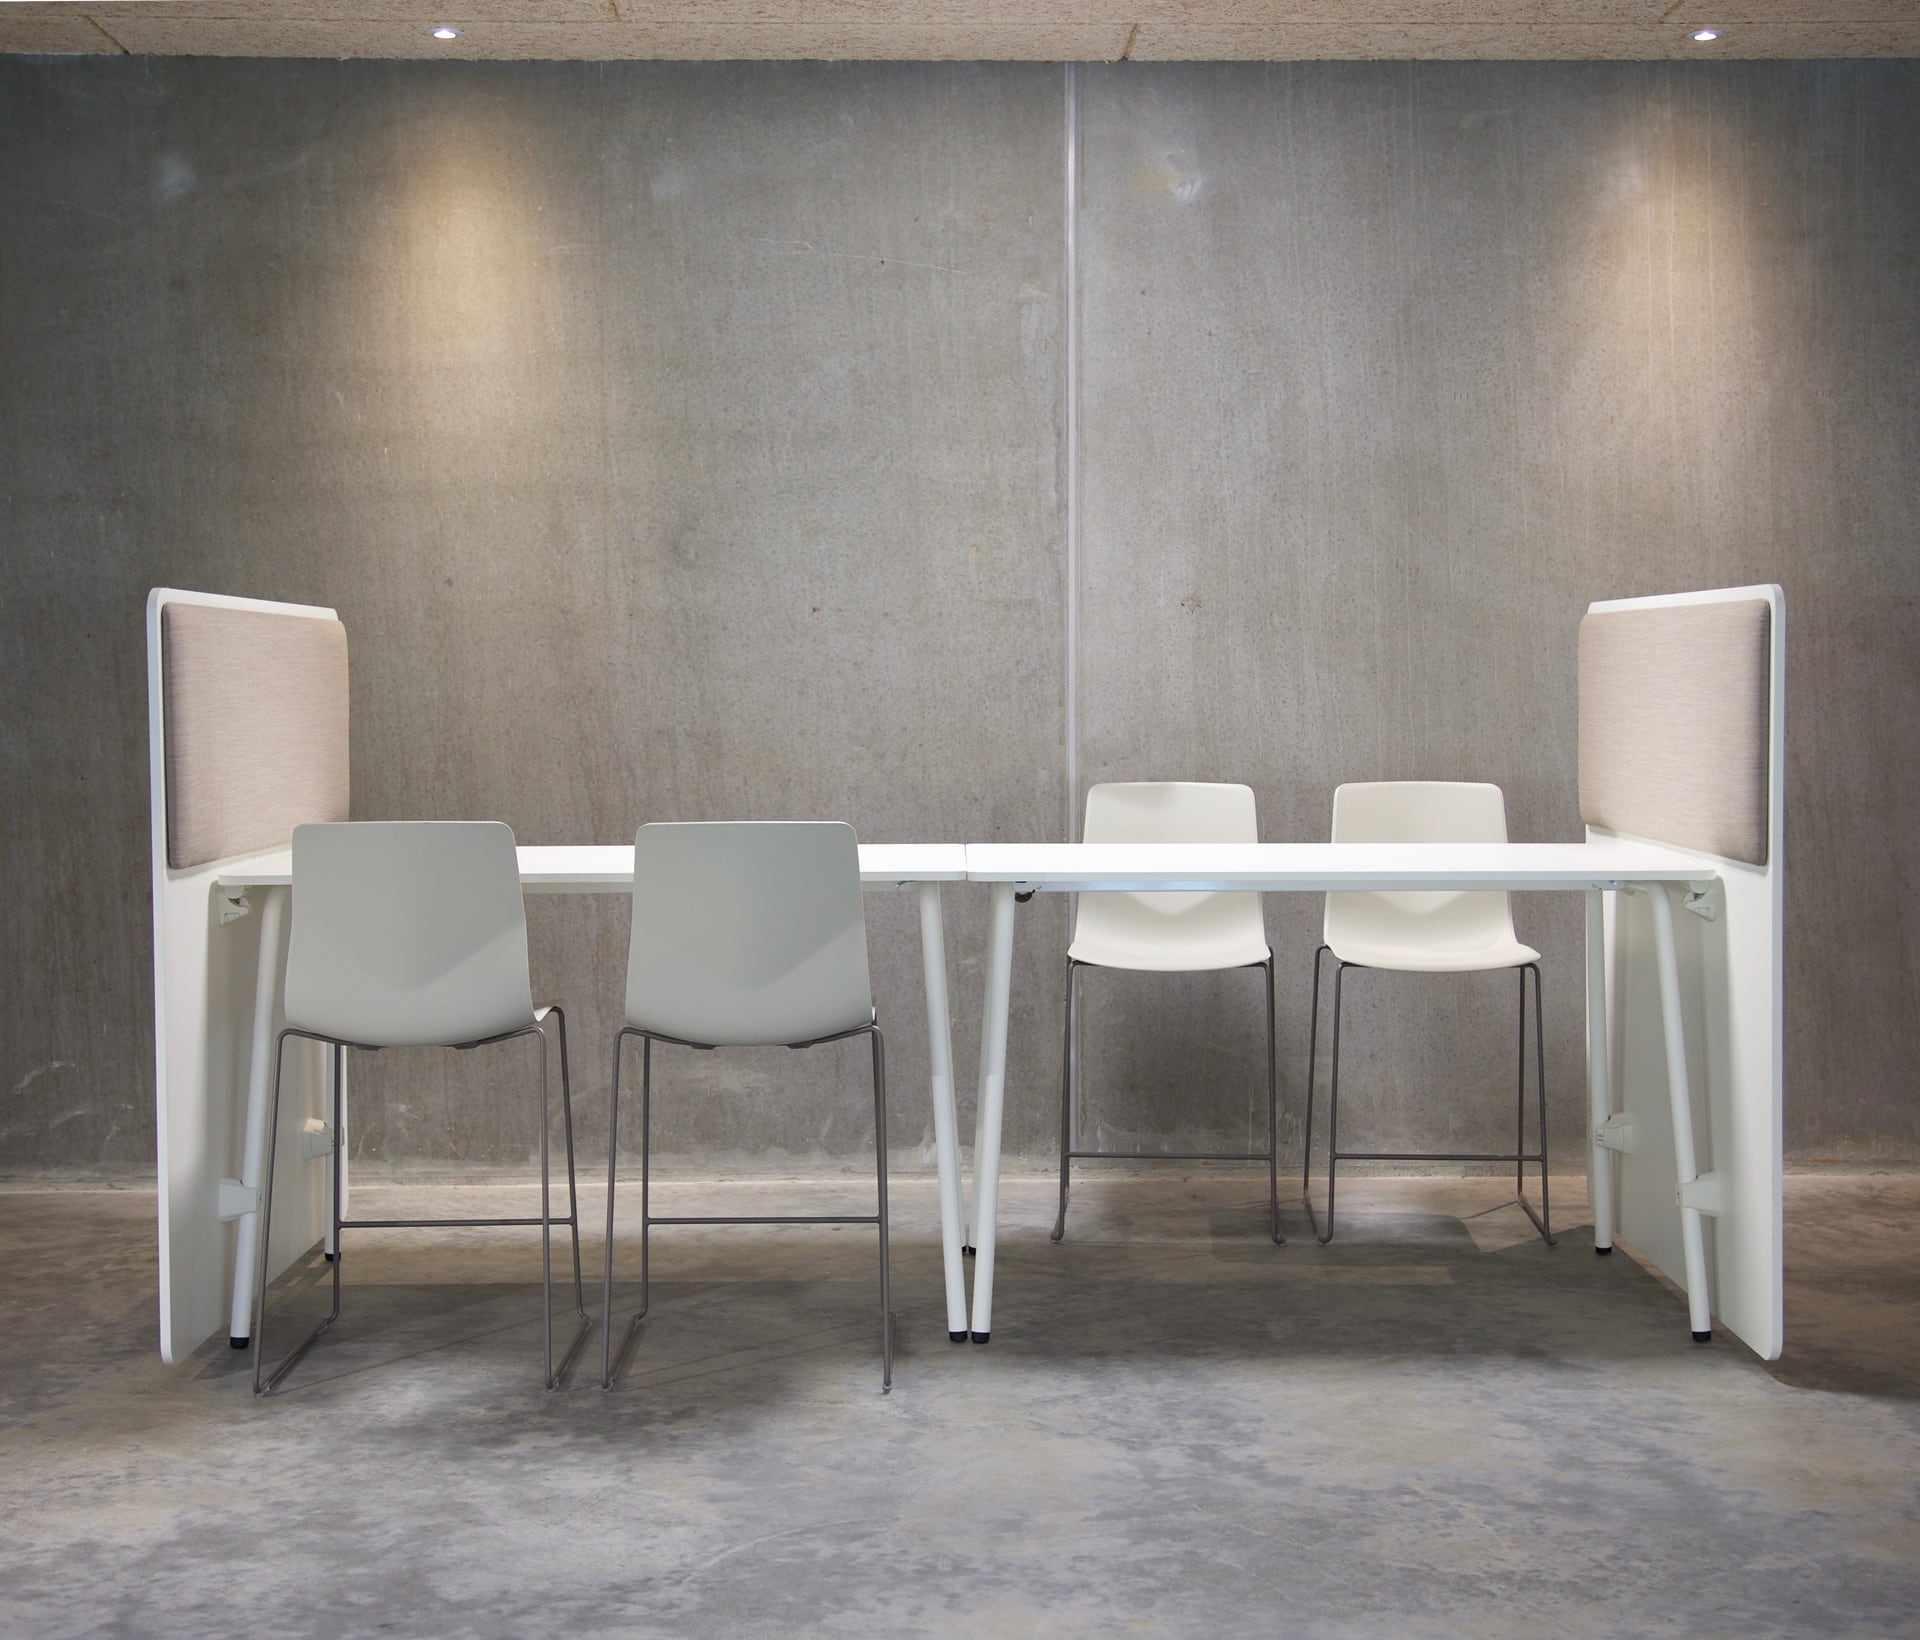 White office tables and counter height chairs seperated by office screen dividers in a room with concrete walls.